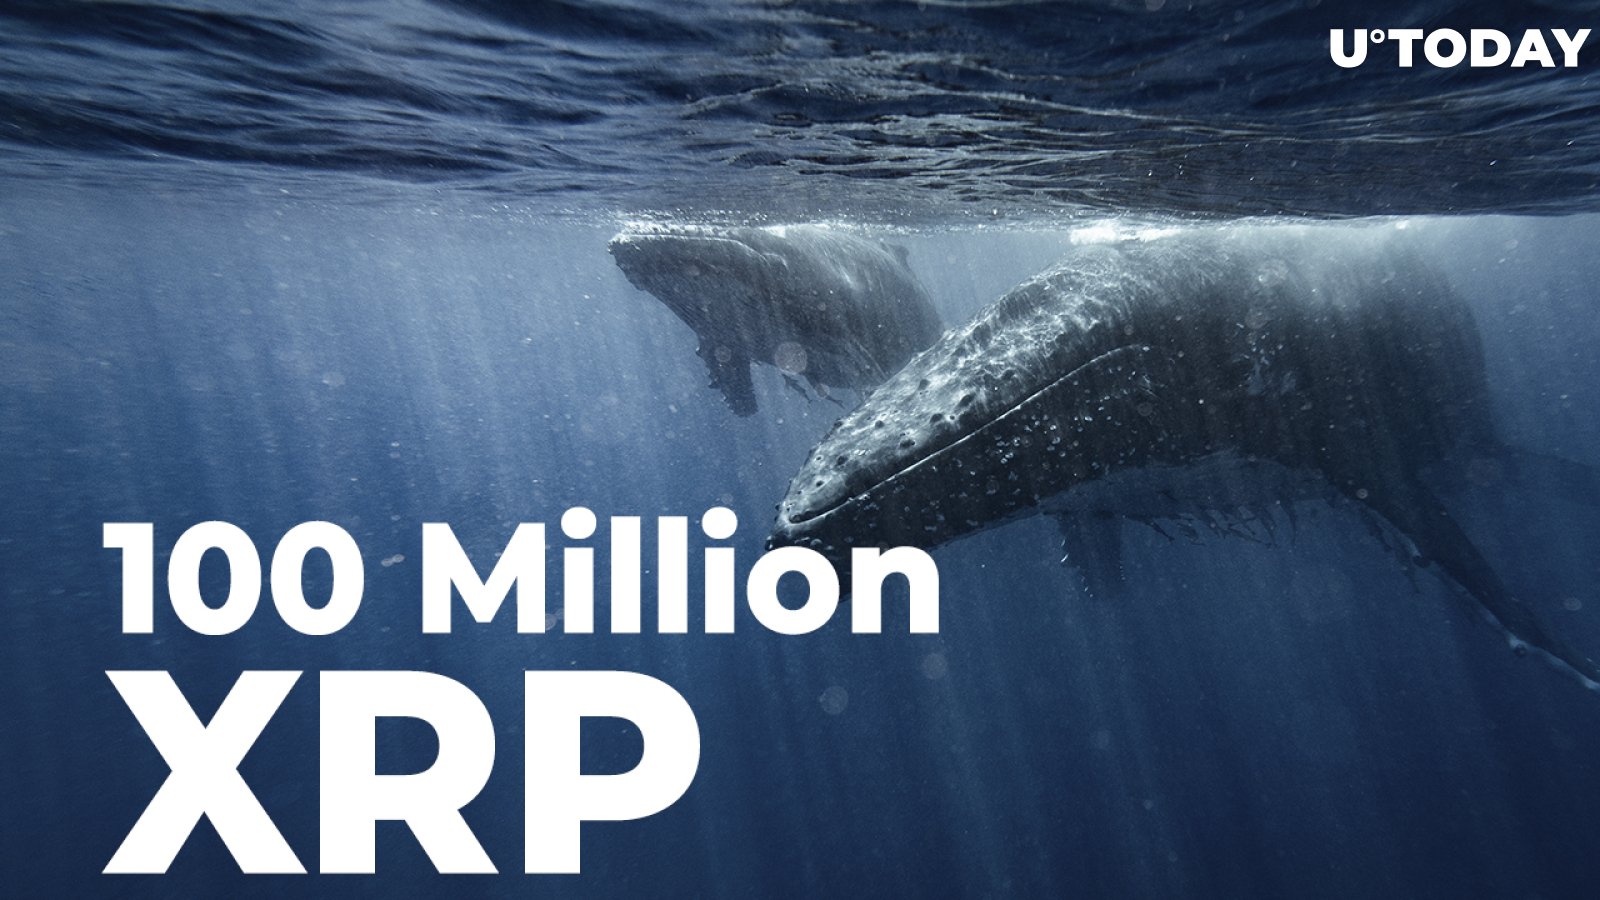 100 Million XRP Purchased by Whale as Coin Consolidates